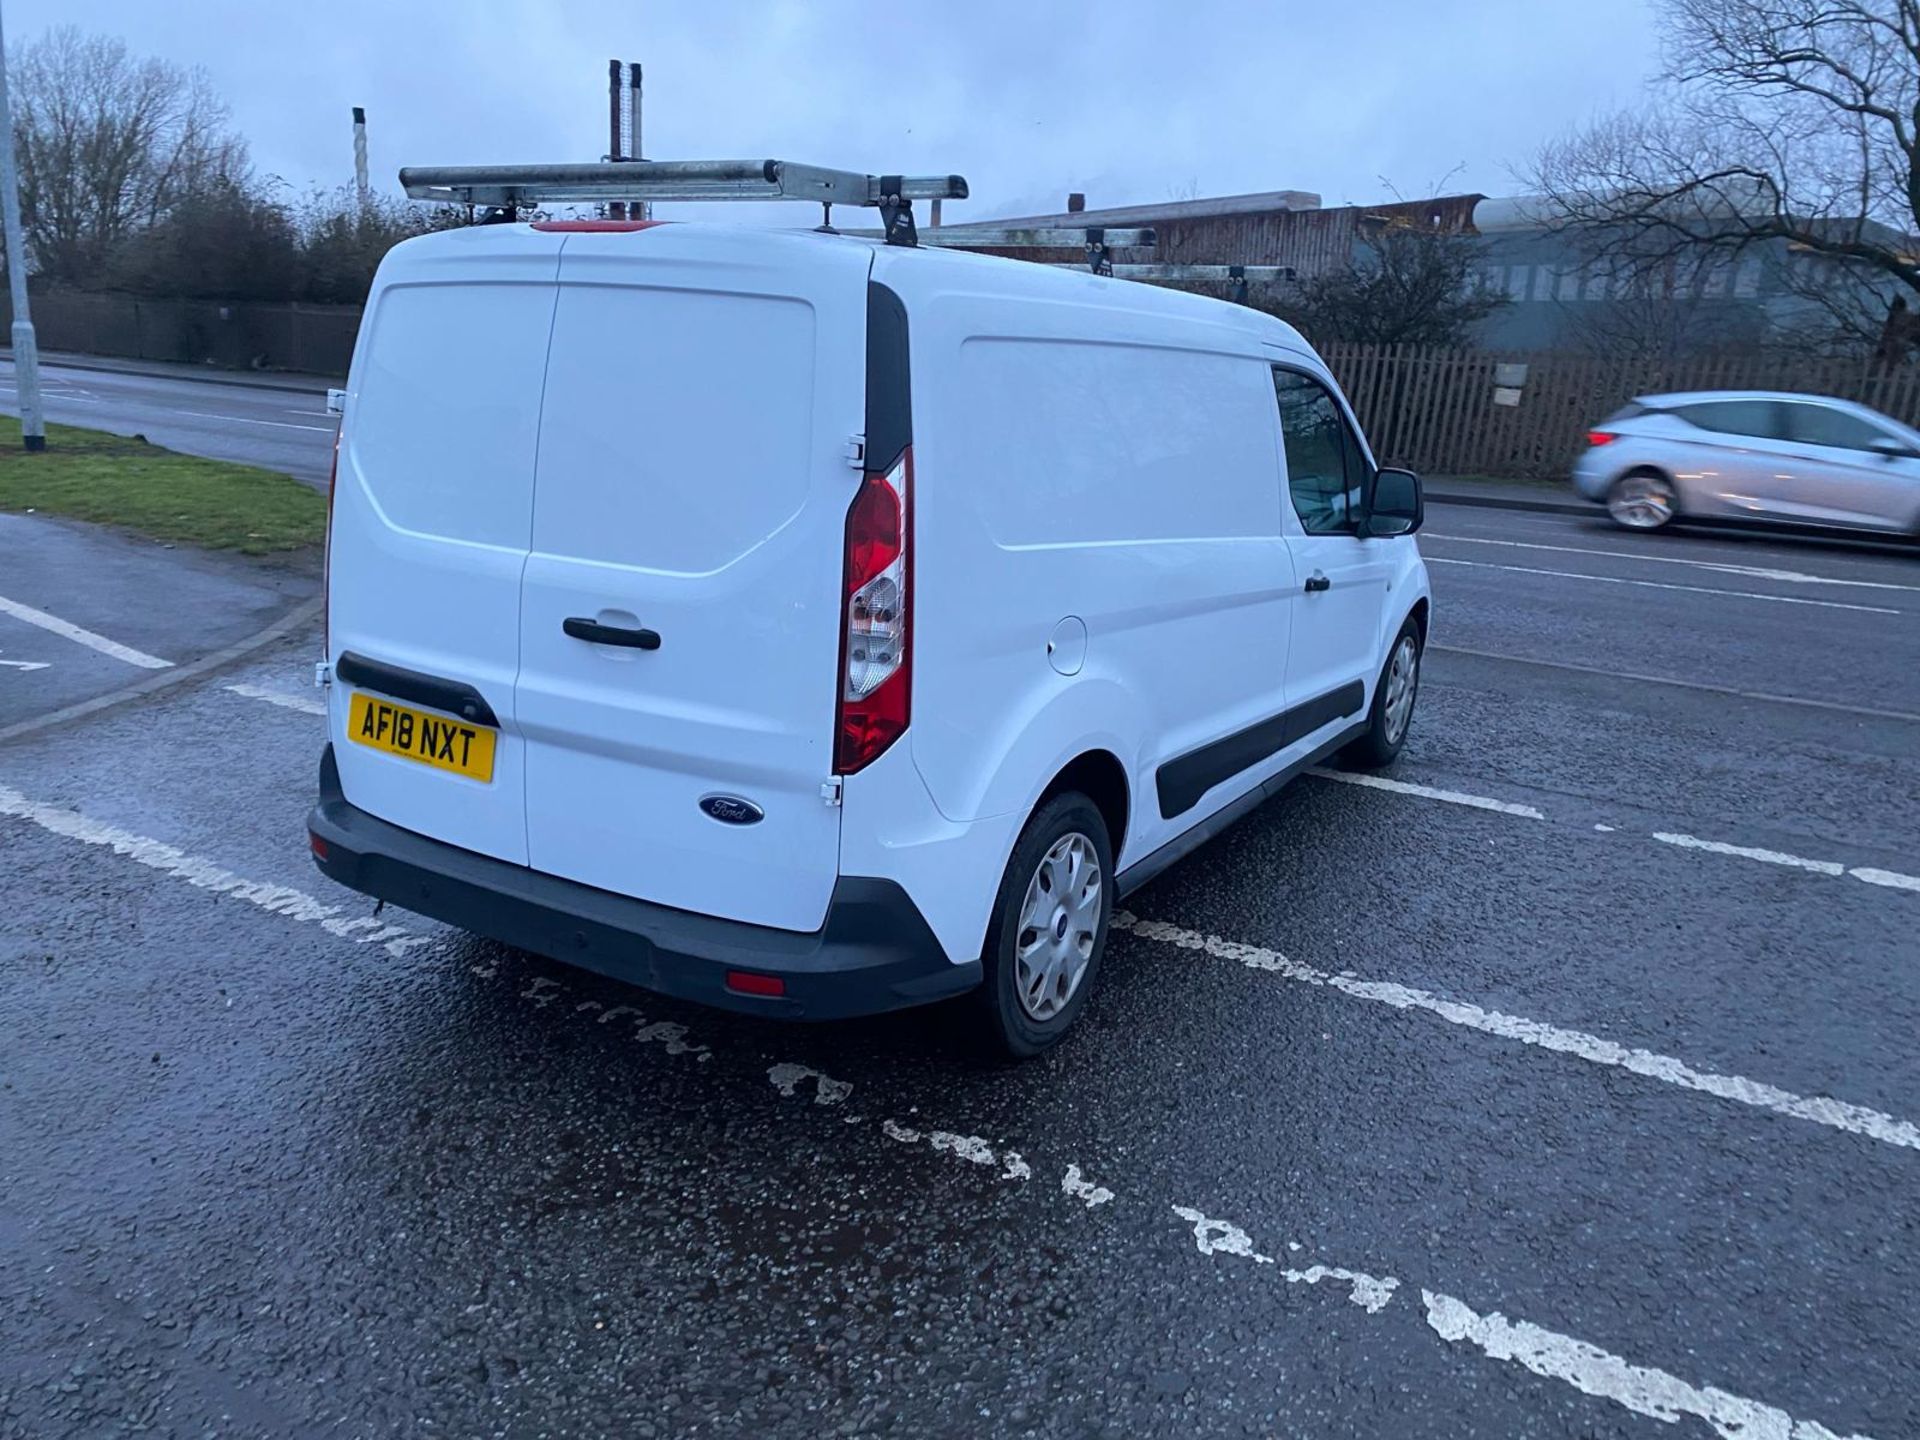 2018 18 FORD TRANSIT CONNECT TREND PAENL VAN - 128K MILES - EURO 6 - 3 SEATS - LWB - ROOF RACK. - Image 7 of 13